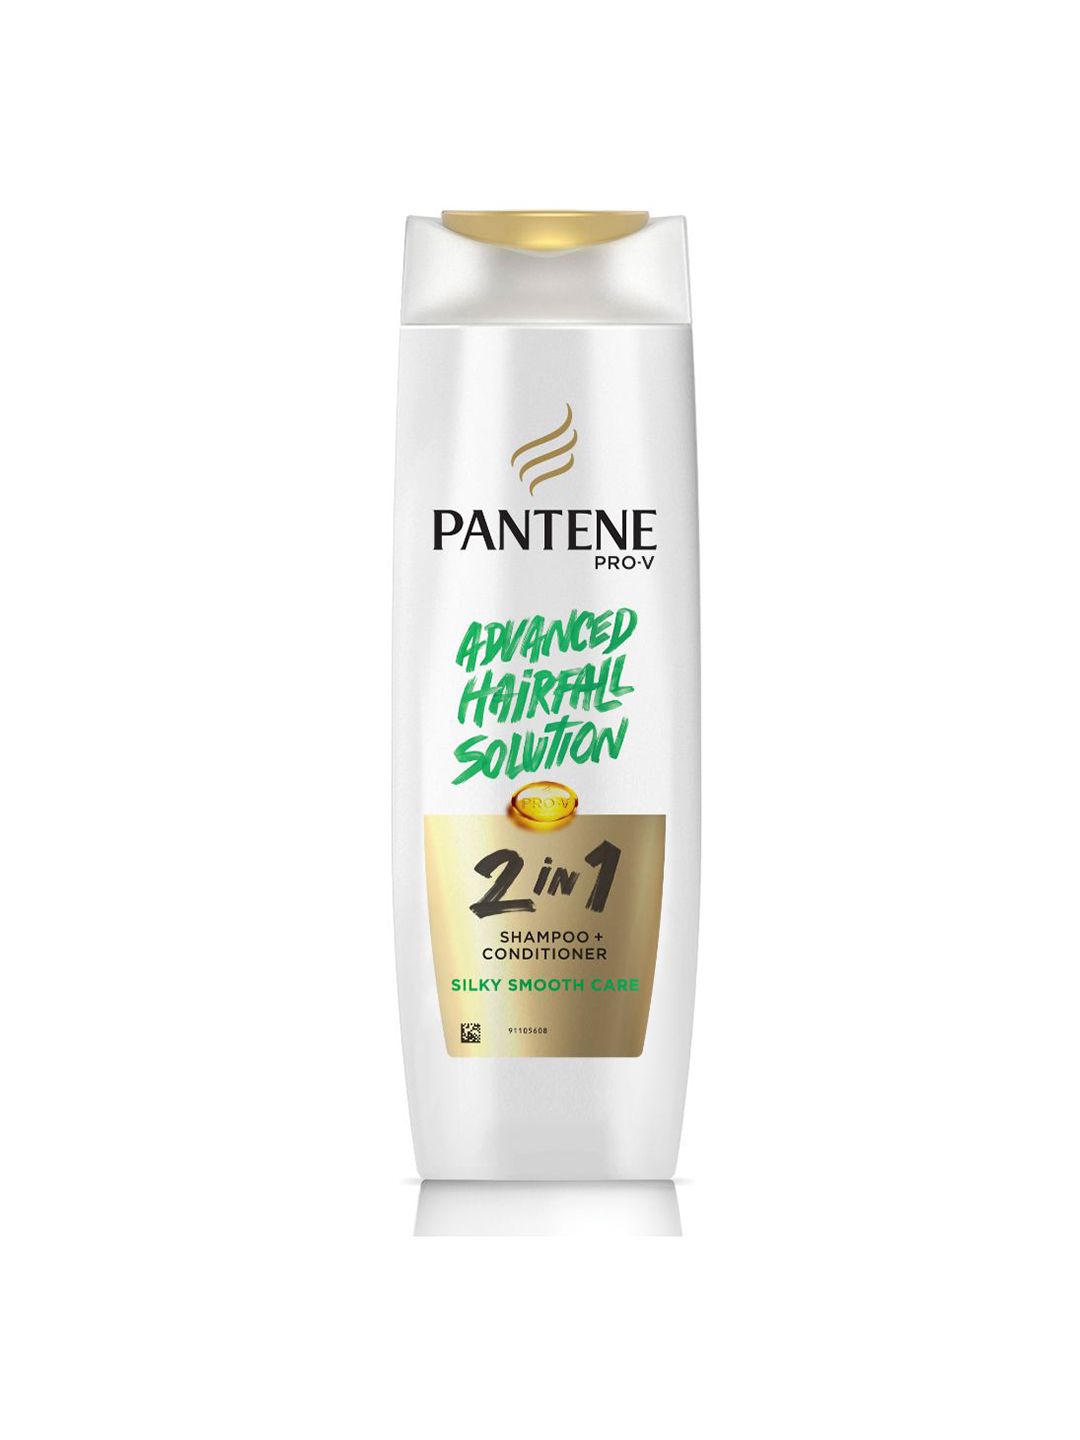 Pantene 2 In 1 Silky Smooth Care Shampoo + Conditioner, 340 ml Price in India